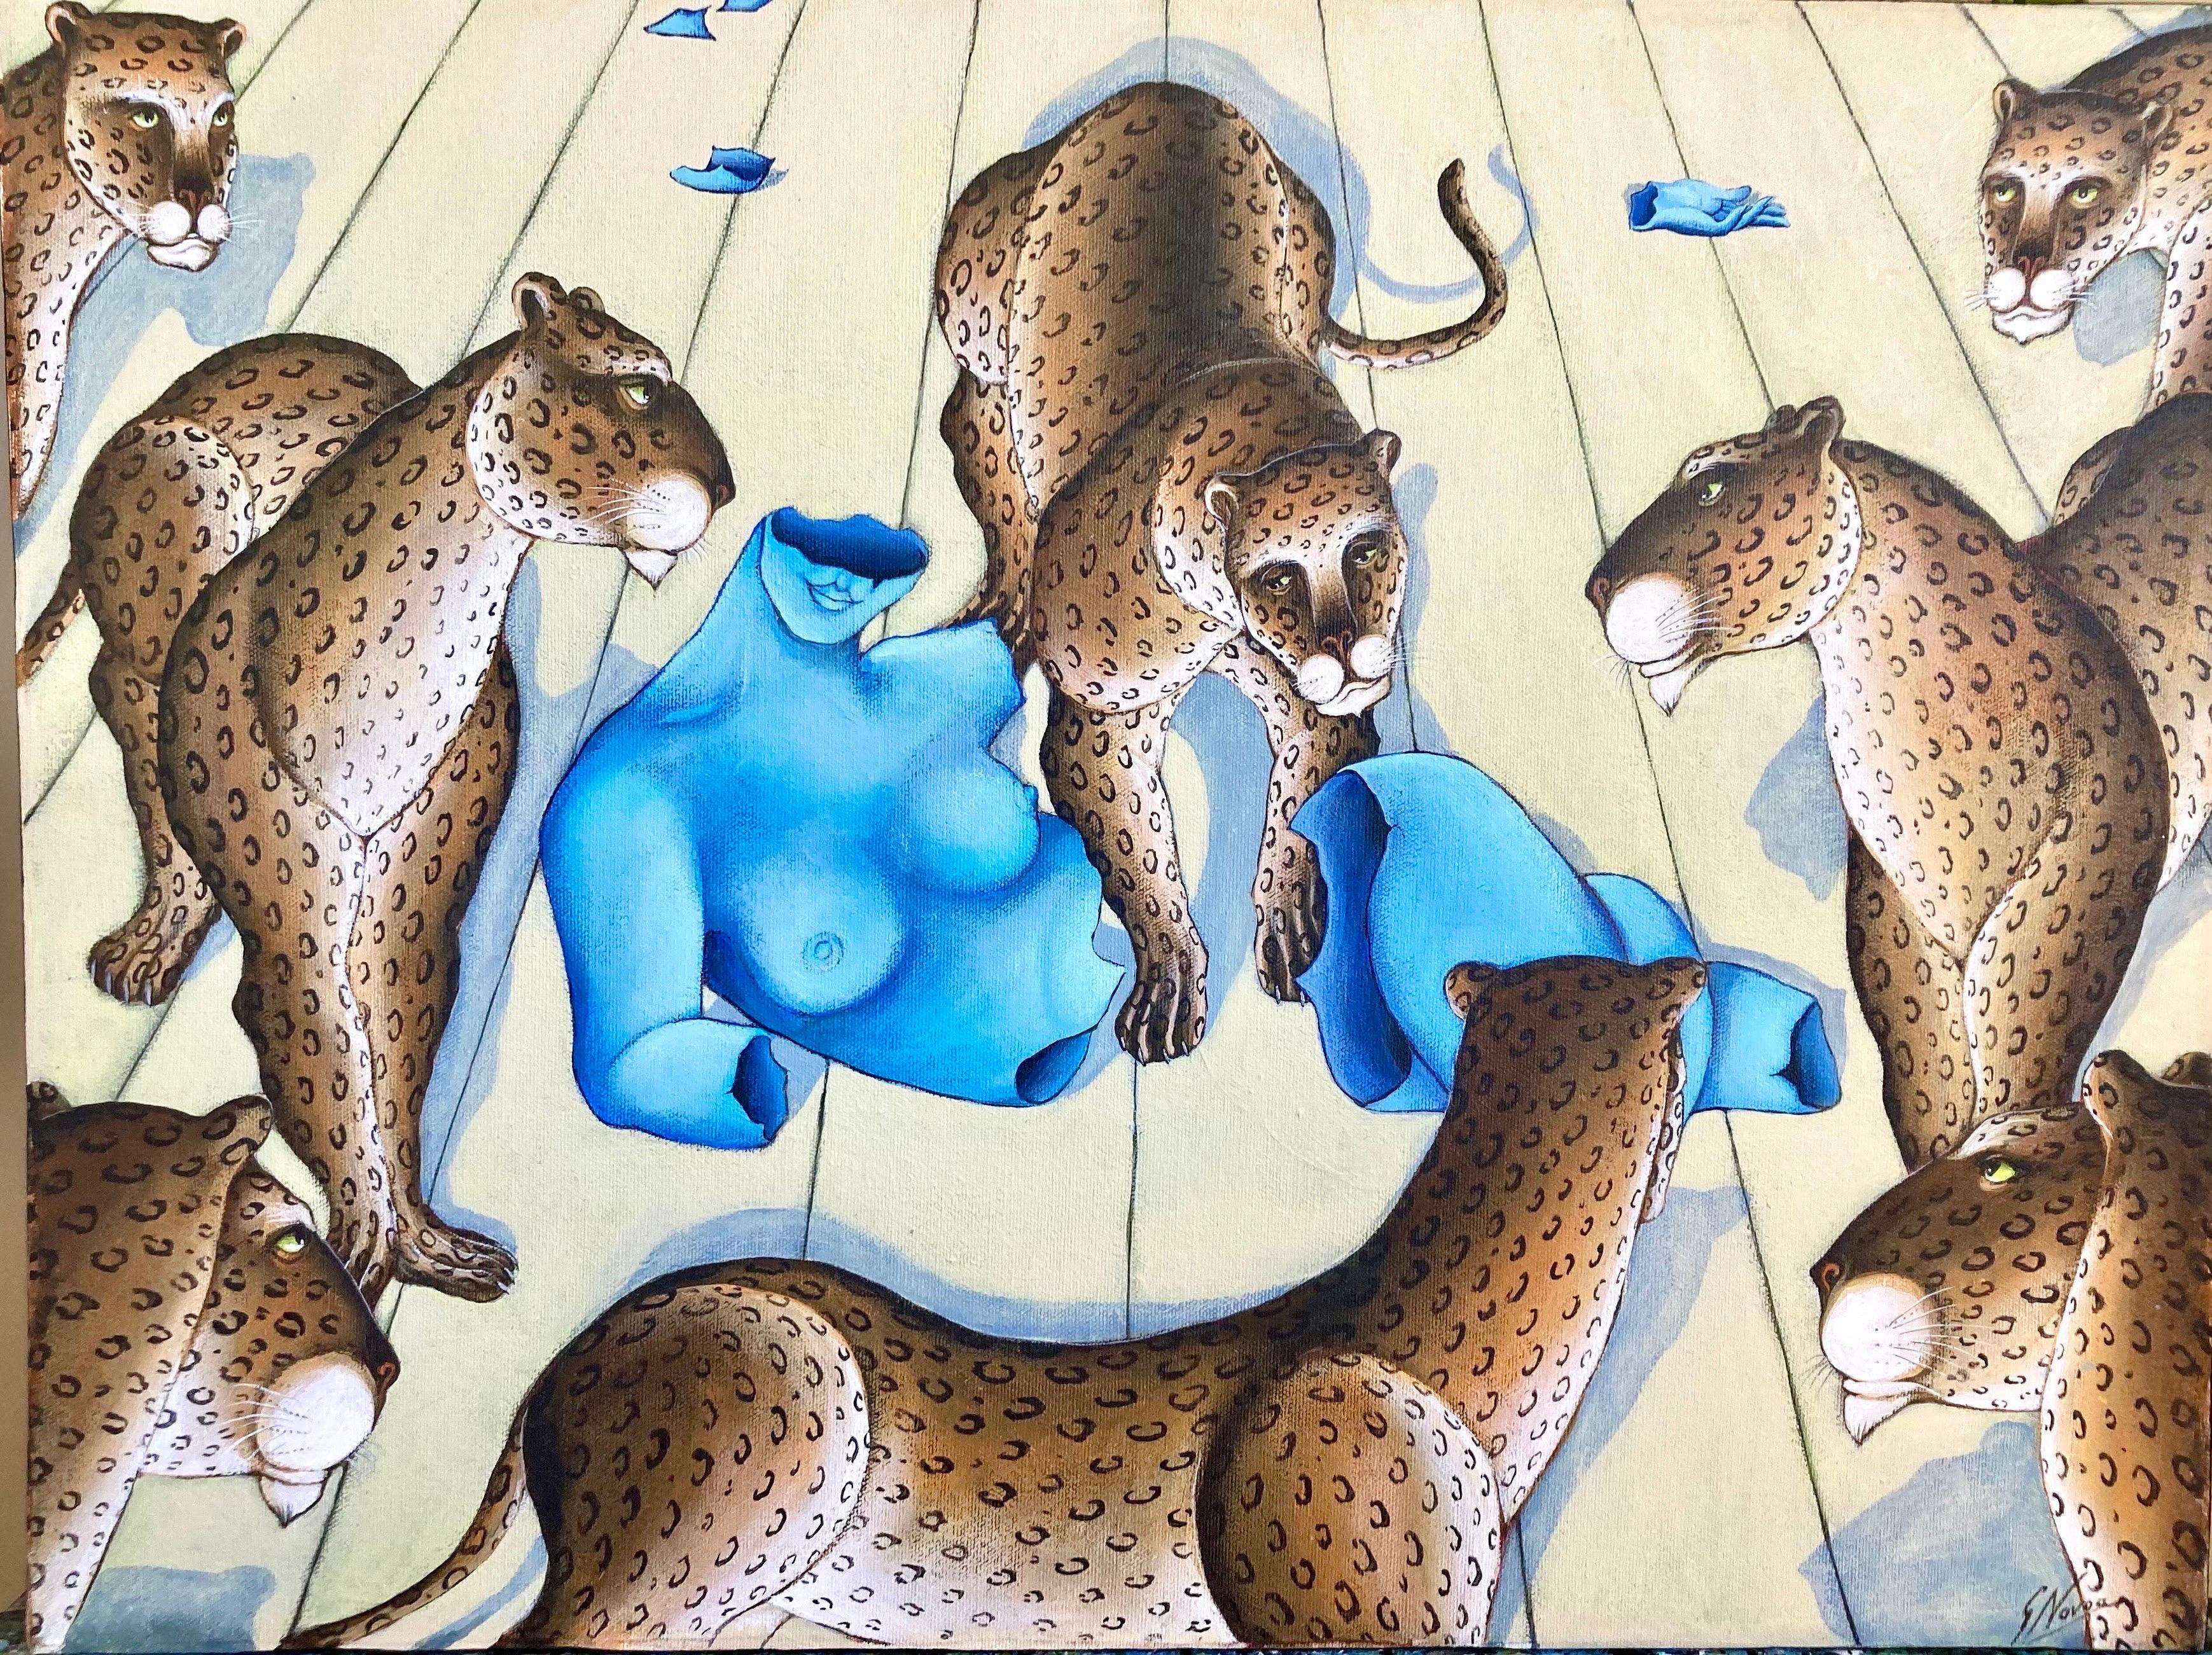 Original Painting leopards  surrounding a blue Venus nude sculpture. tropical jungle setting. Titled "Blue Venus".
Hand signed recto and signed, titled and dated verso. 

Gustavo Novoa, Born 1941 in Santiago, Chile, He attended the Academy of Fine